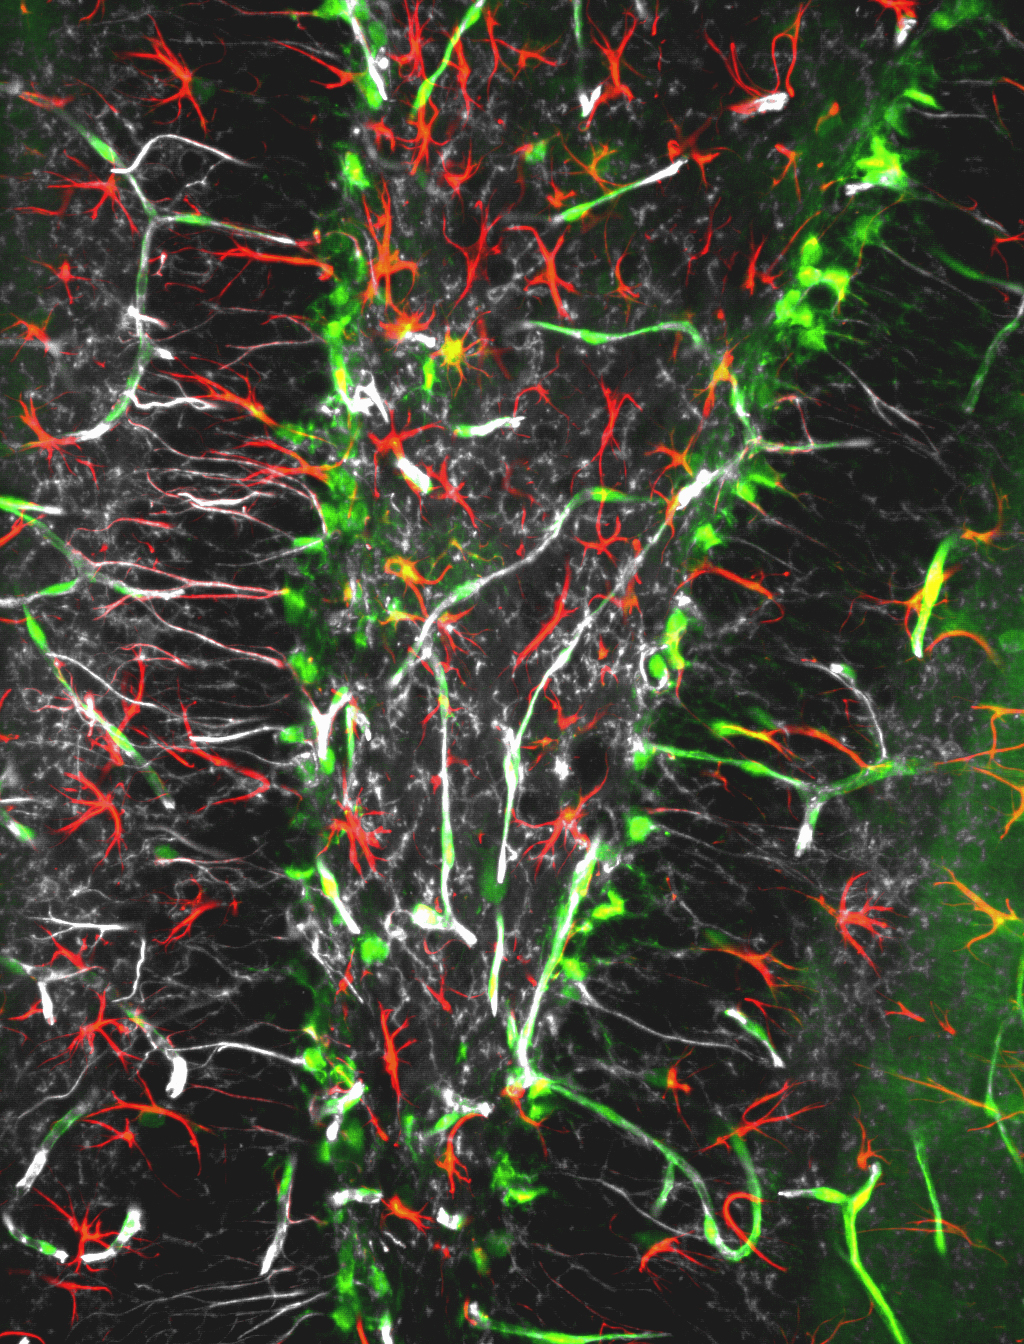 VEGF-C, an indispensable growth factor for producing new neurons